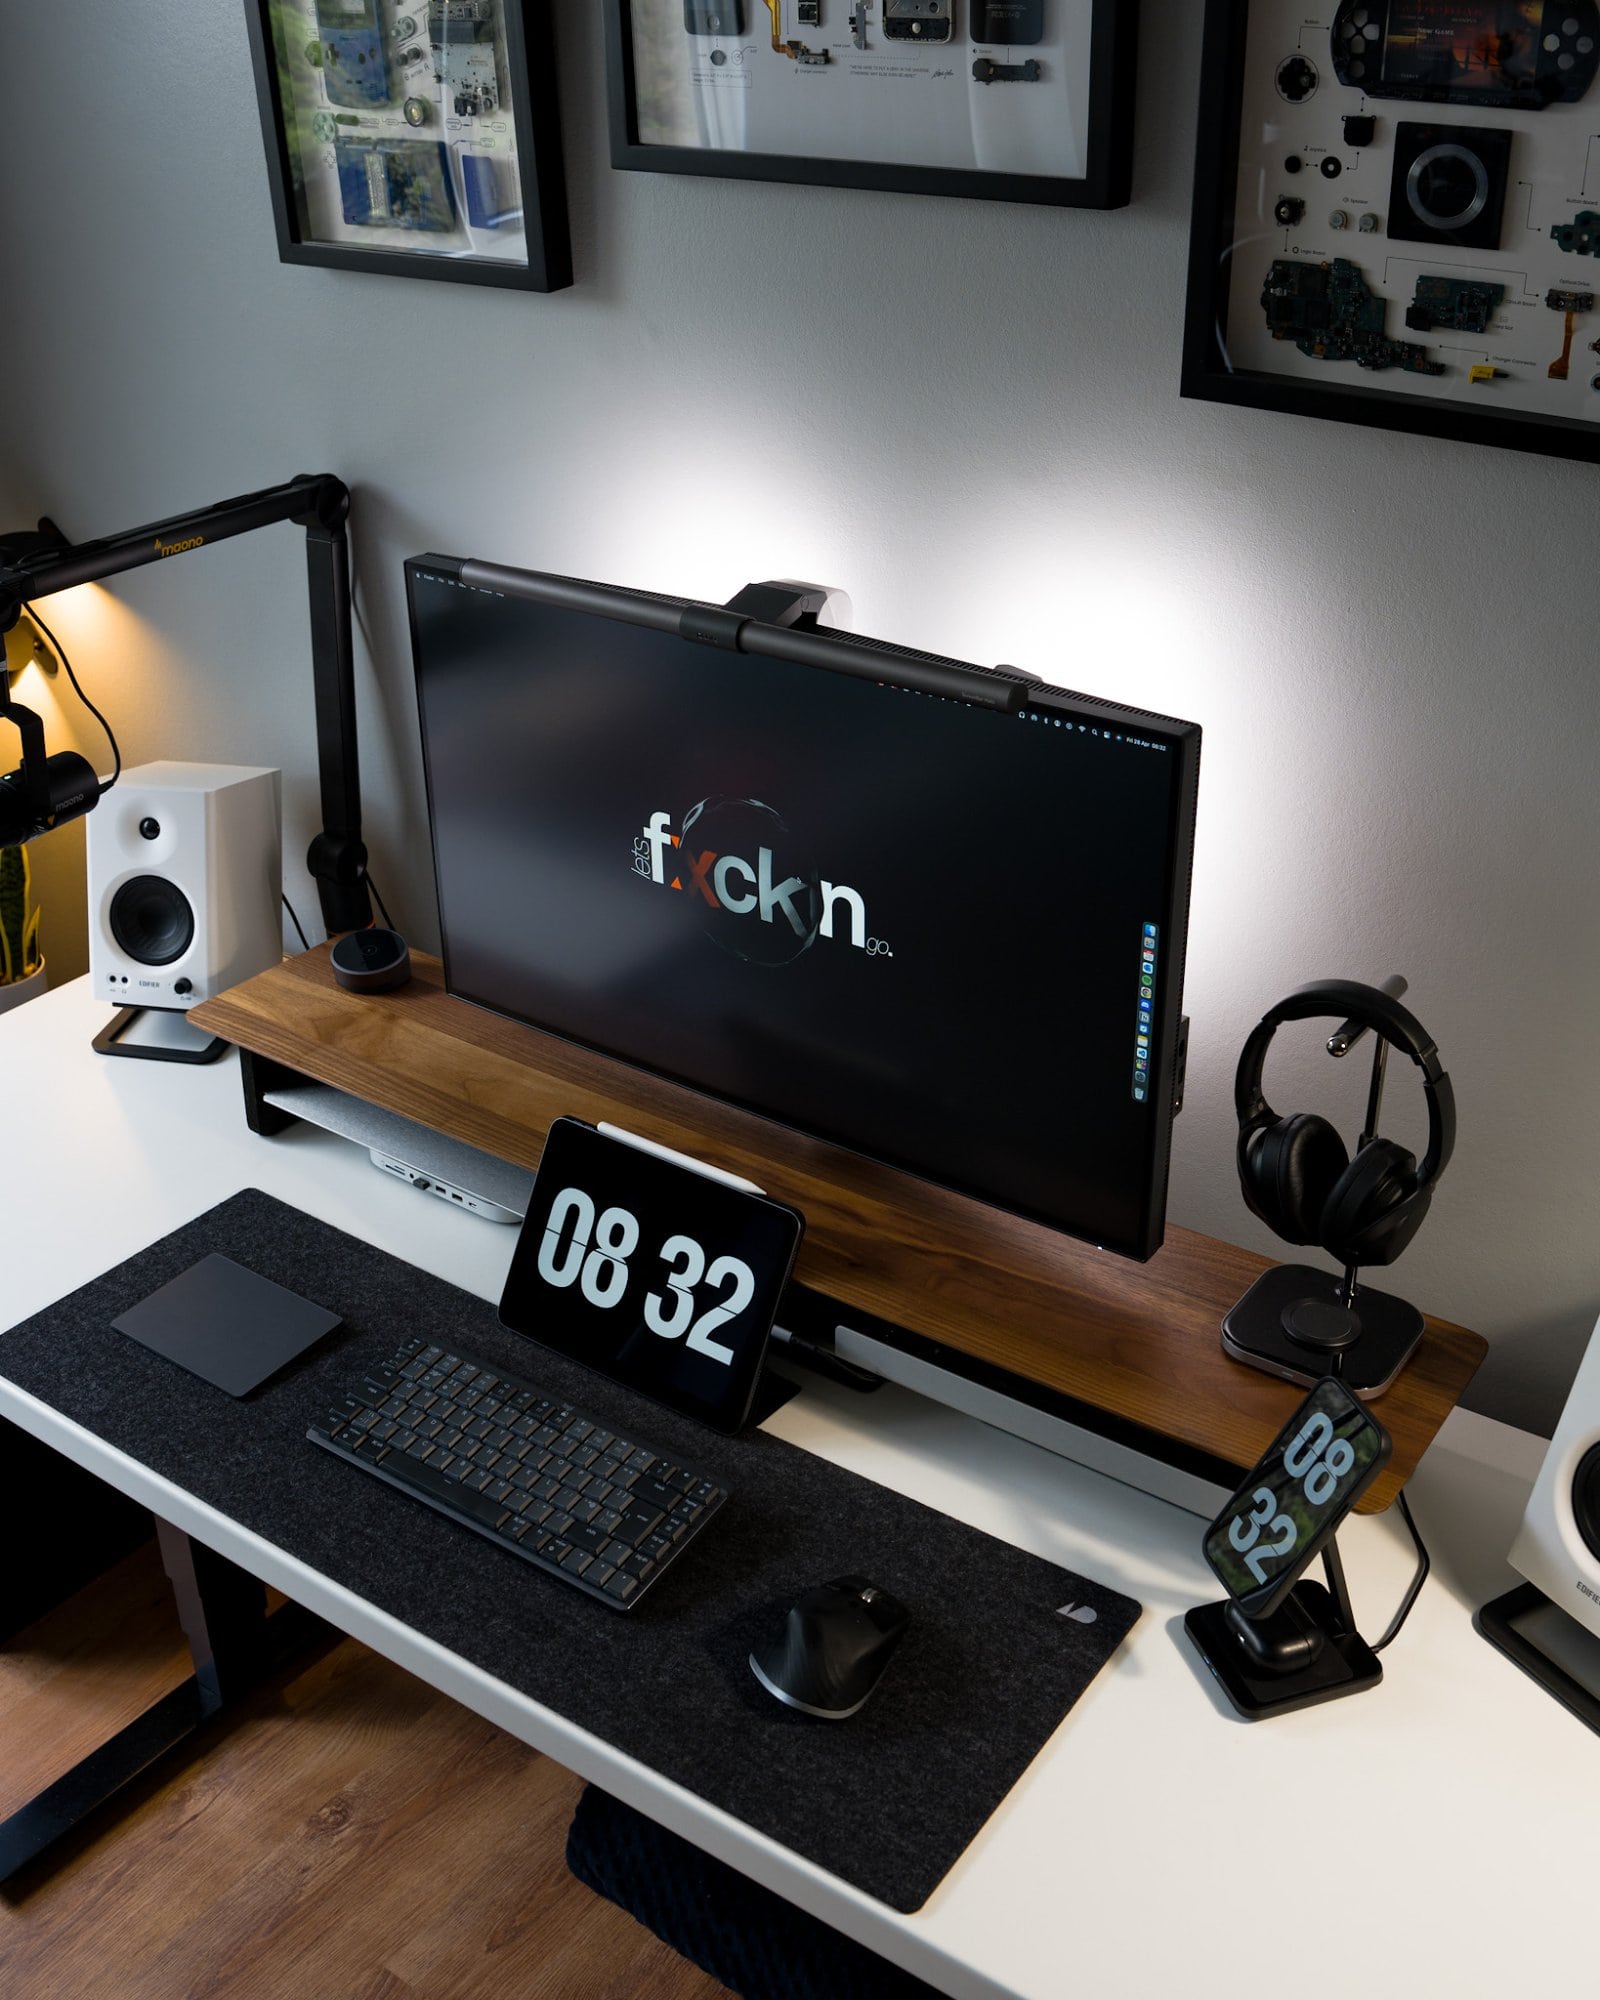 A minimal black and white desk setup featuring a BenQ PD3220U monitor, Edifier MR4 speakers, and Sony XM3 headphones, among other devices and peripherals